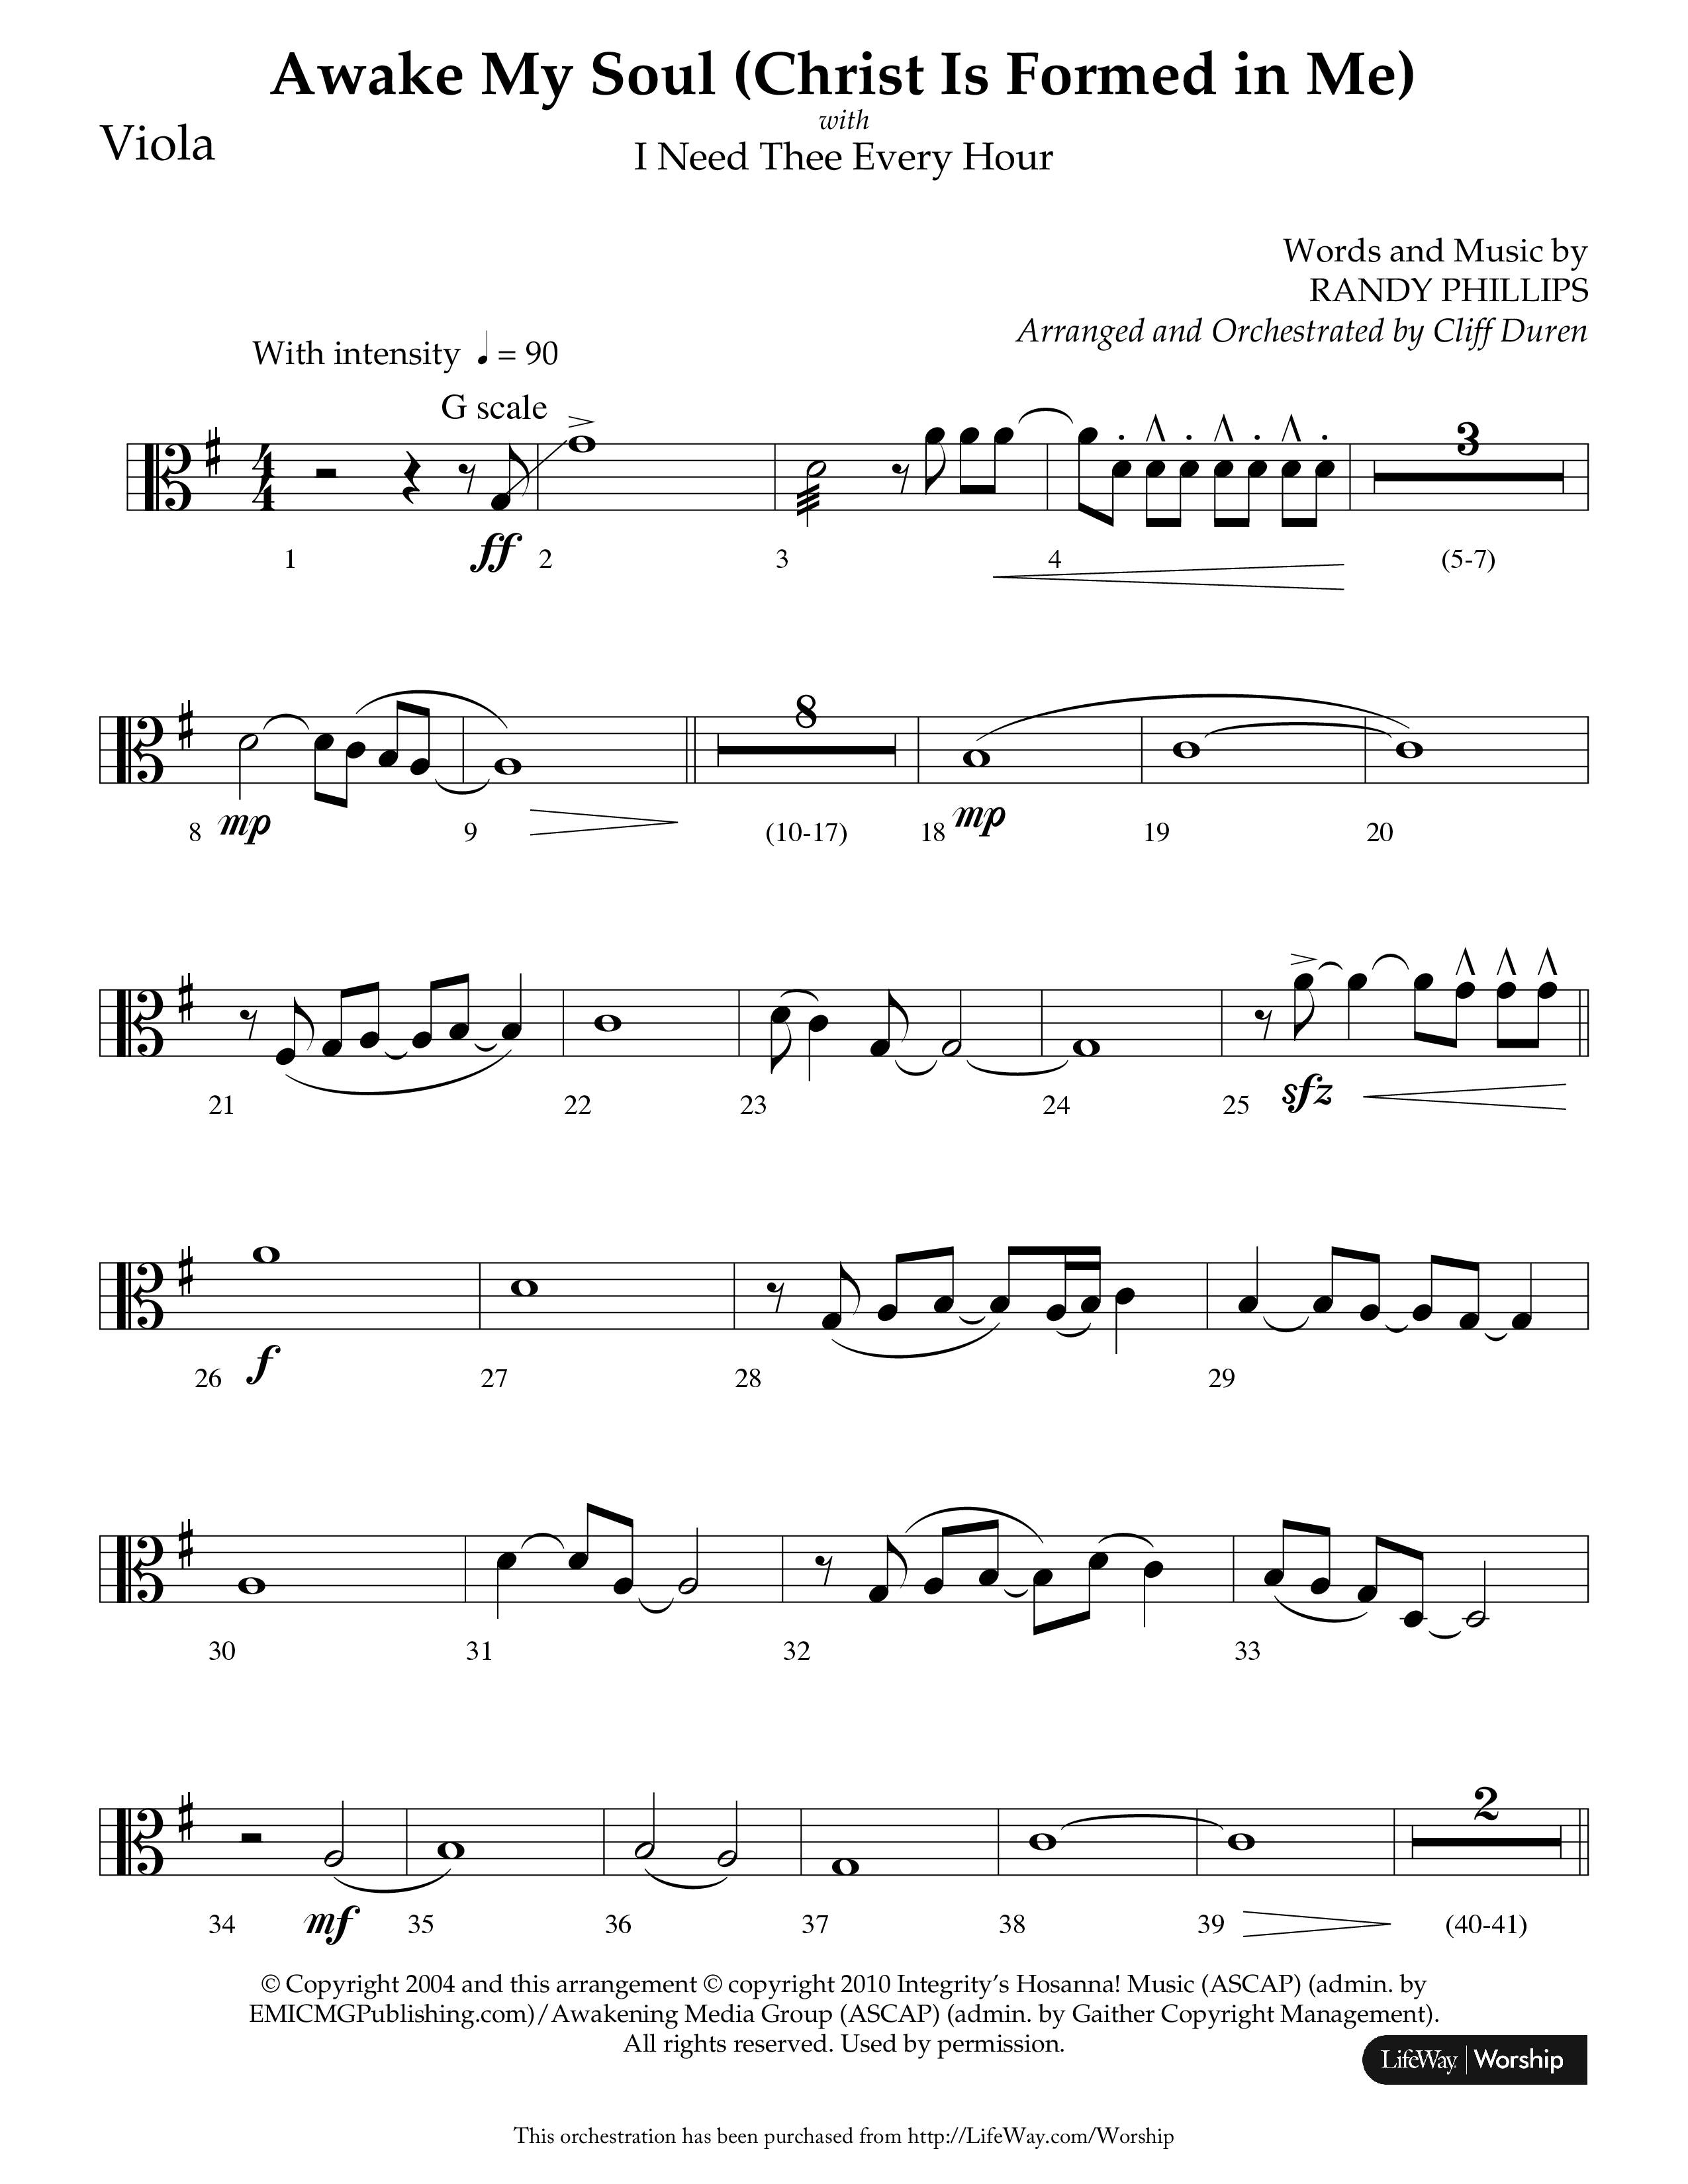 Awake My Soul (Christ Is Formed In Me) with I Need Thee Every Hour (Choral Anthem SATB) Viola (Lifeway Choral / Arr. Cliff Duren)